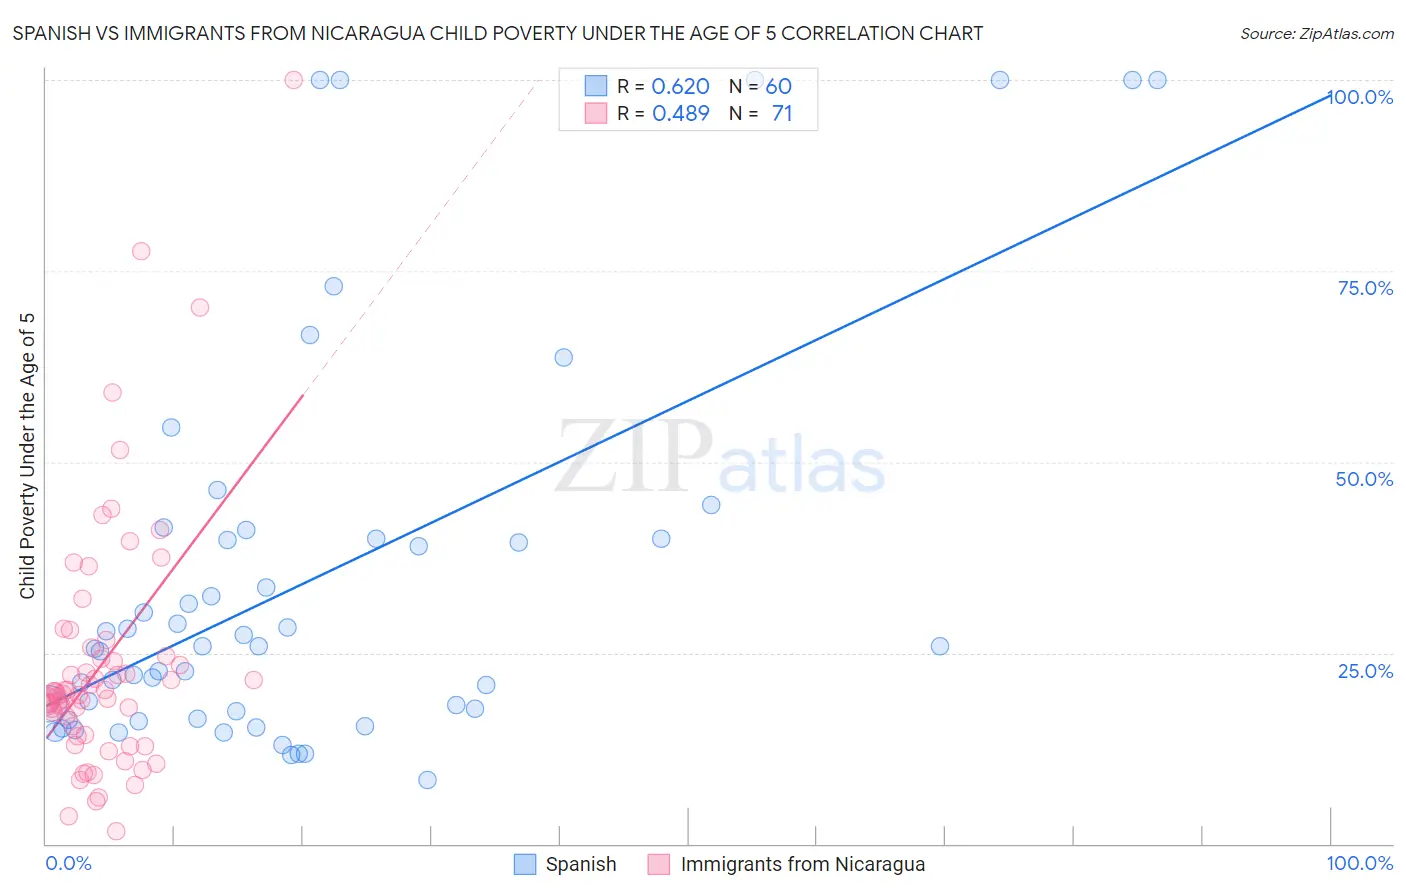 Spanish vs Immigrants from Nicaragua Child Poverty Under the Age of 5